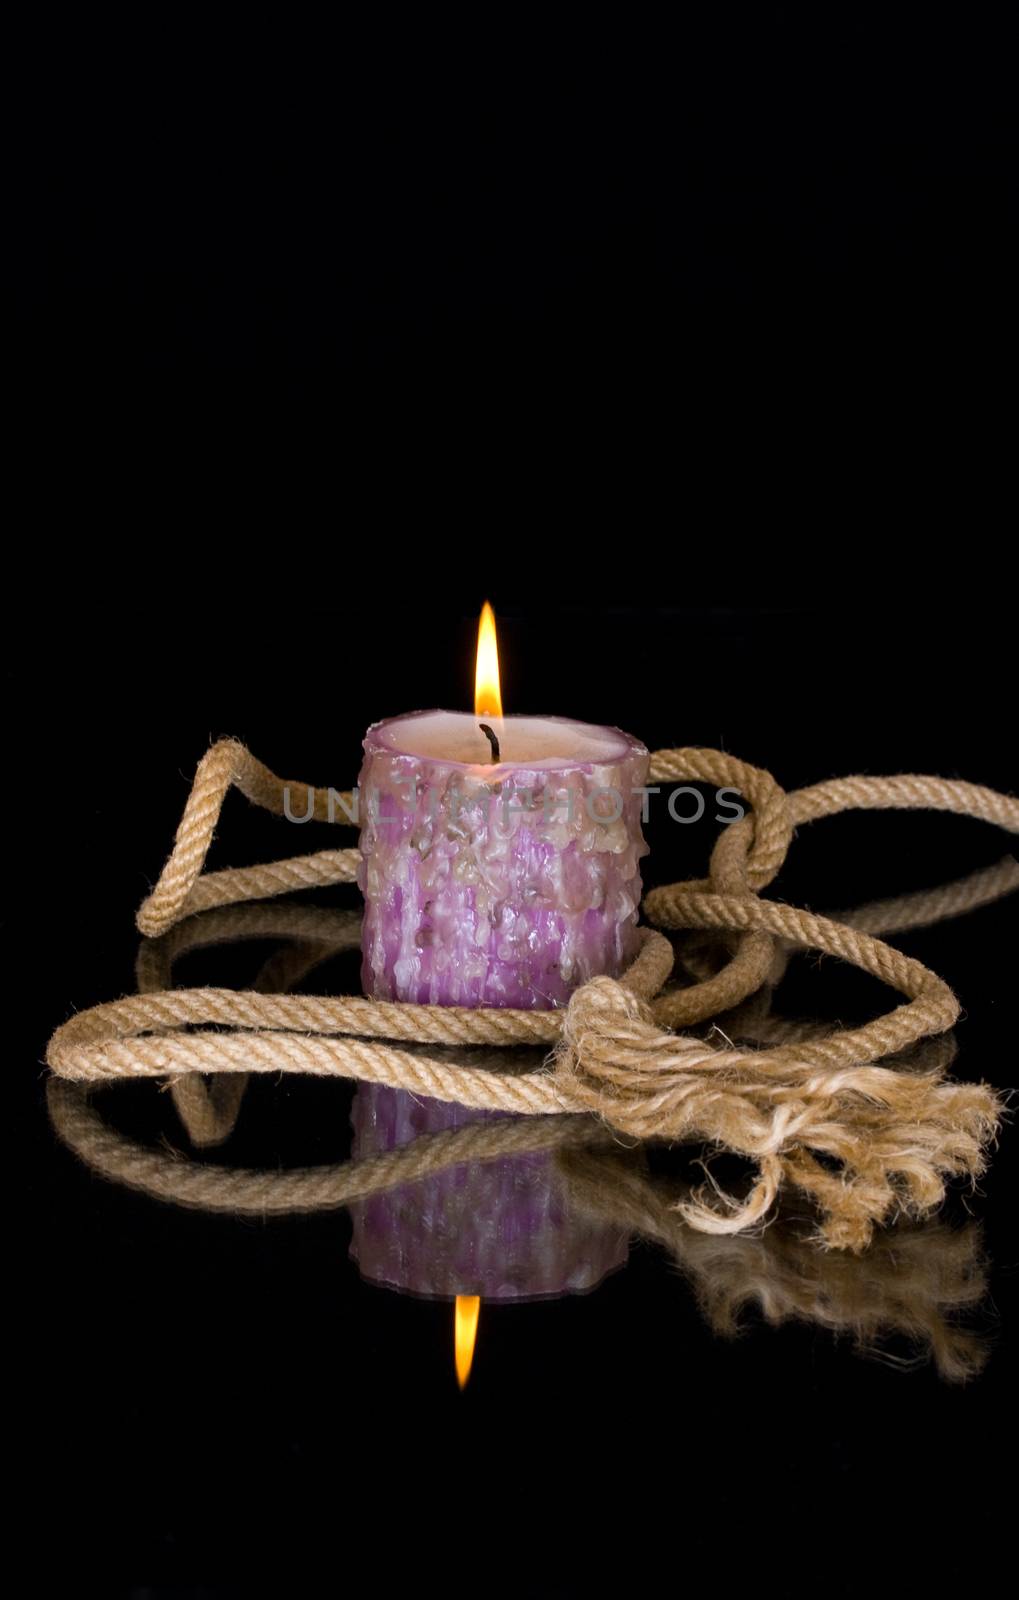 decoration with rope and candle by Irina1977